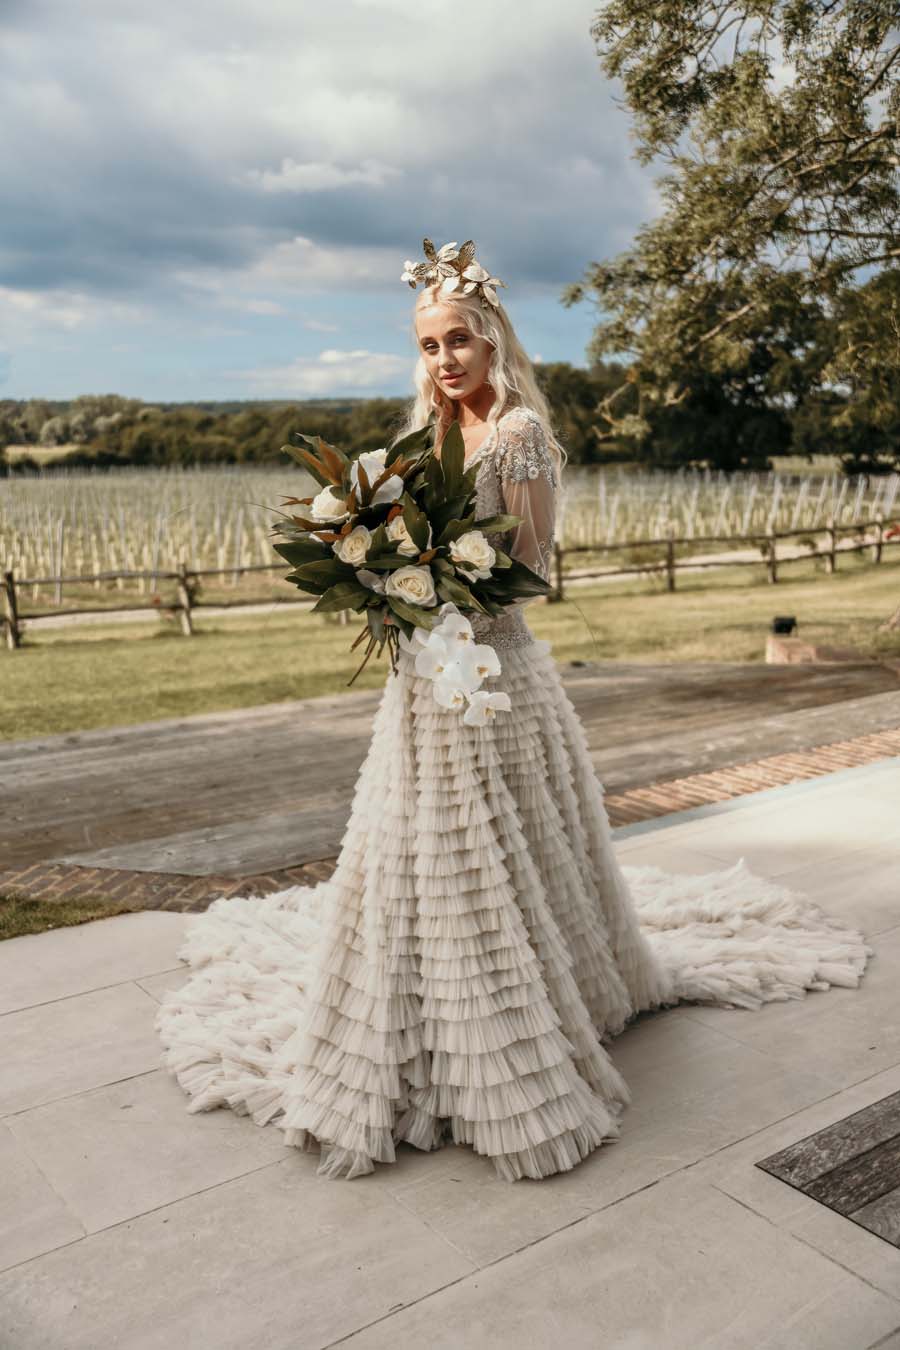 How To Plan A Beautiful Vineyard Wedding Right Here in the UK